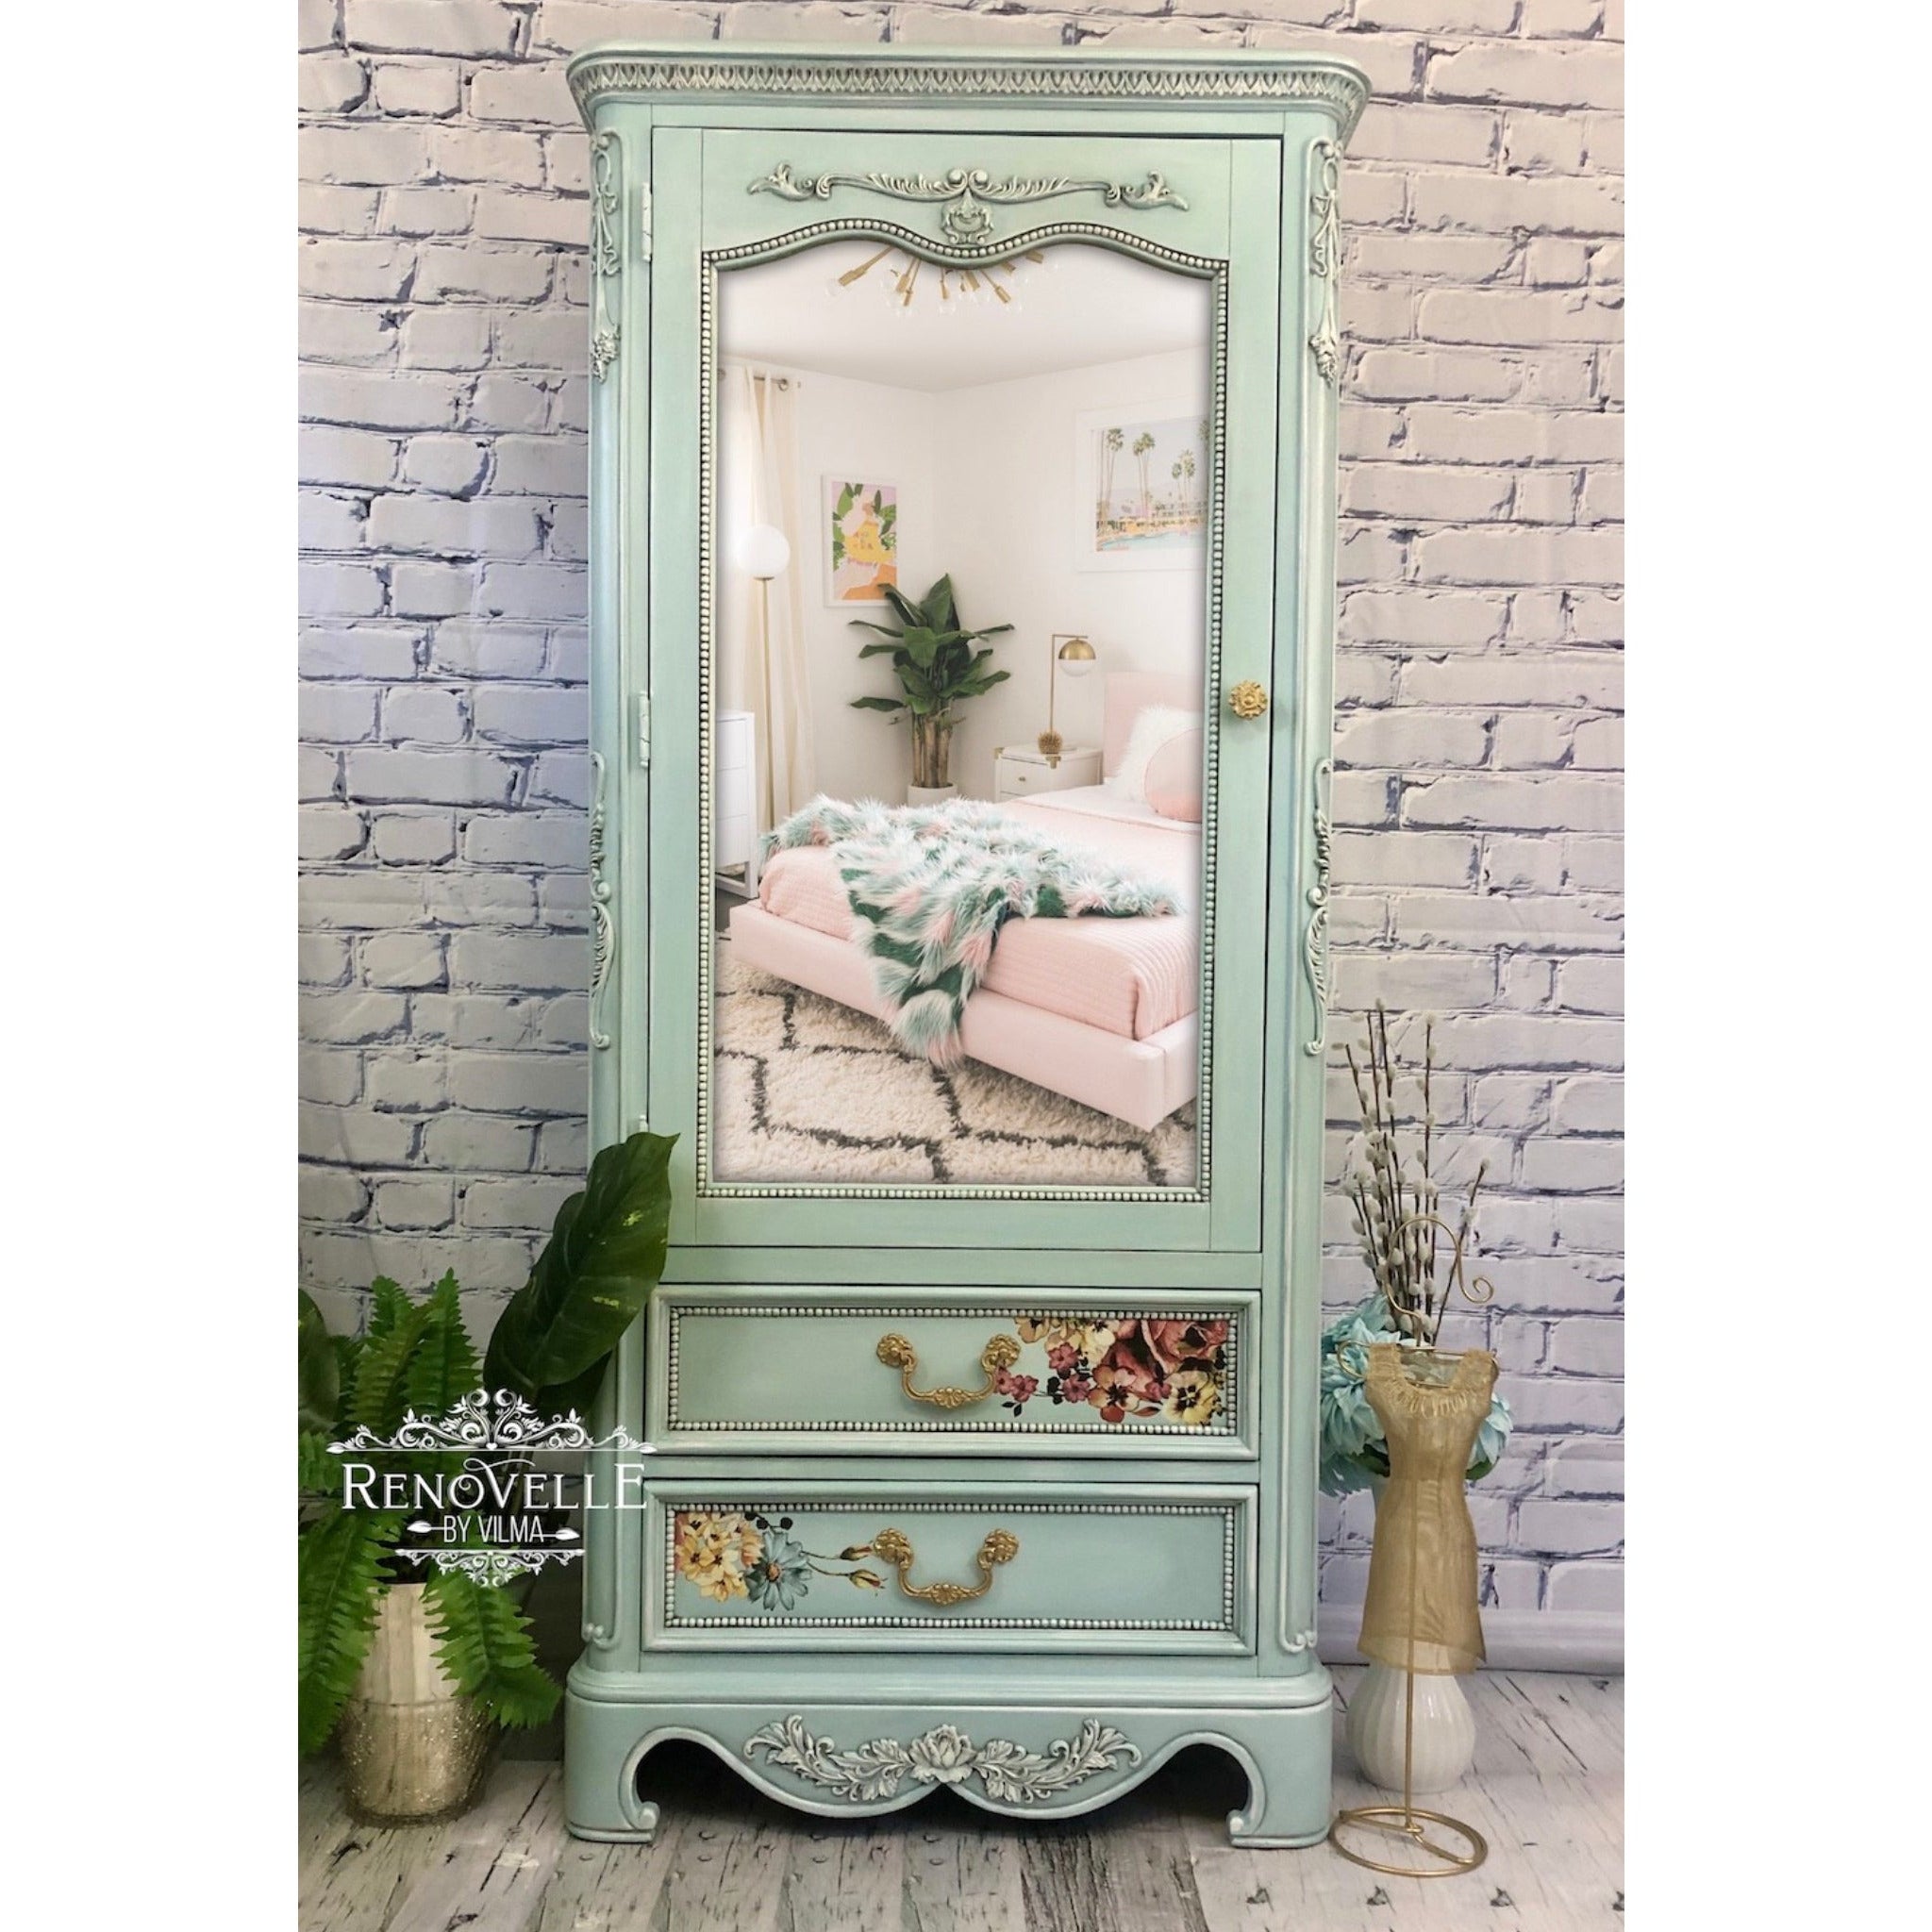 A vintage armoire refurbished by Renovelle by Vilma is painted mint green and features ReDesign with Prima's Baroque Swirls silicone mold castings on it.